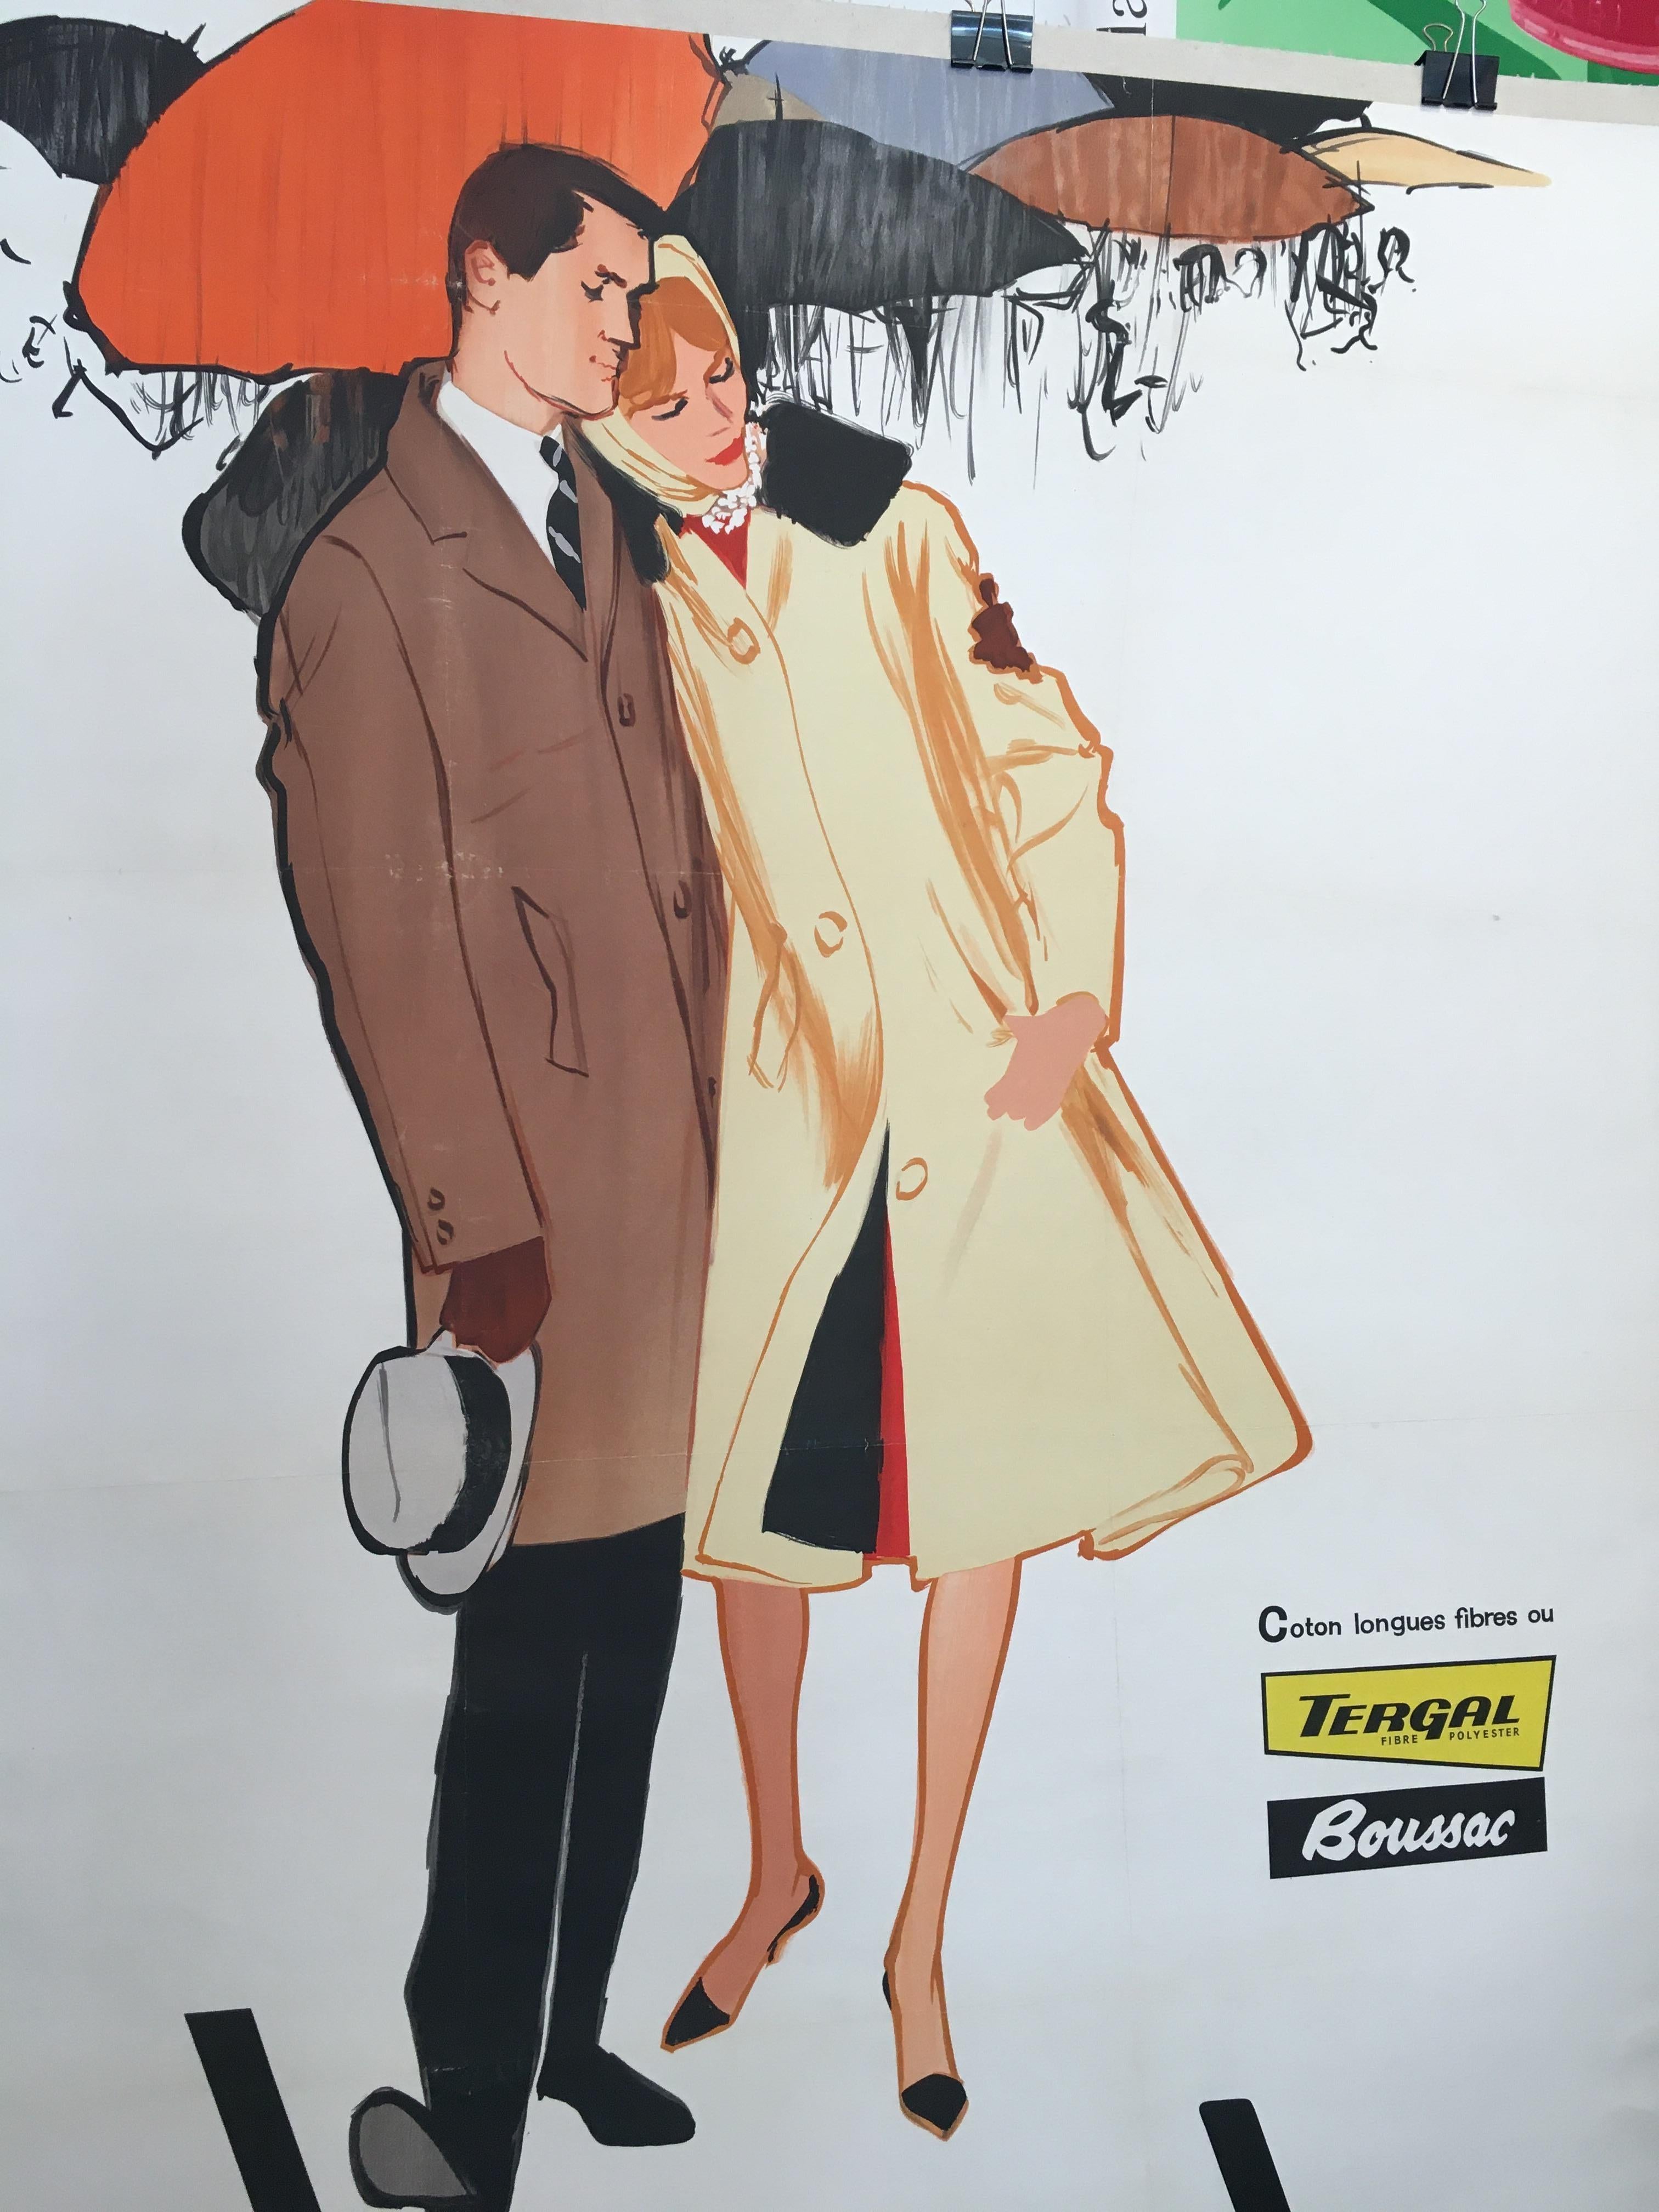 Original vintage French fashion advertisement poster 'Blizzand Couple' by Gruau

Gruau’s fashion illustrations epitomize the glamour and sophistication of 1950s couture, gracing the era’s most iconic magazines and advertisements, from Vogue and